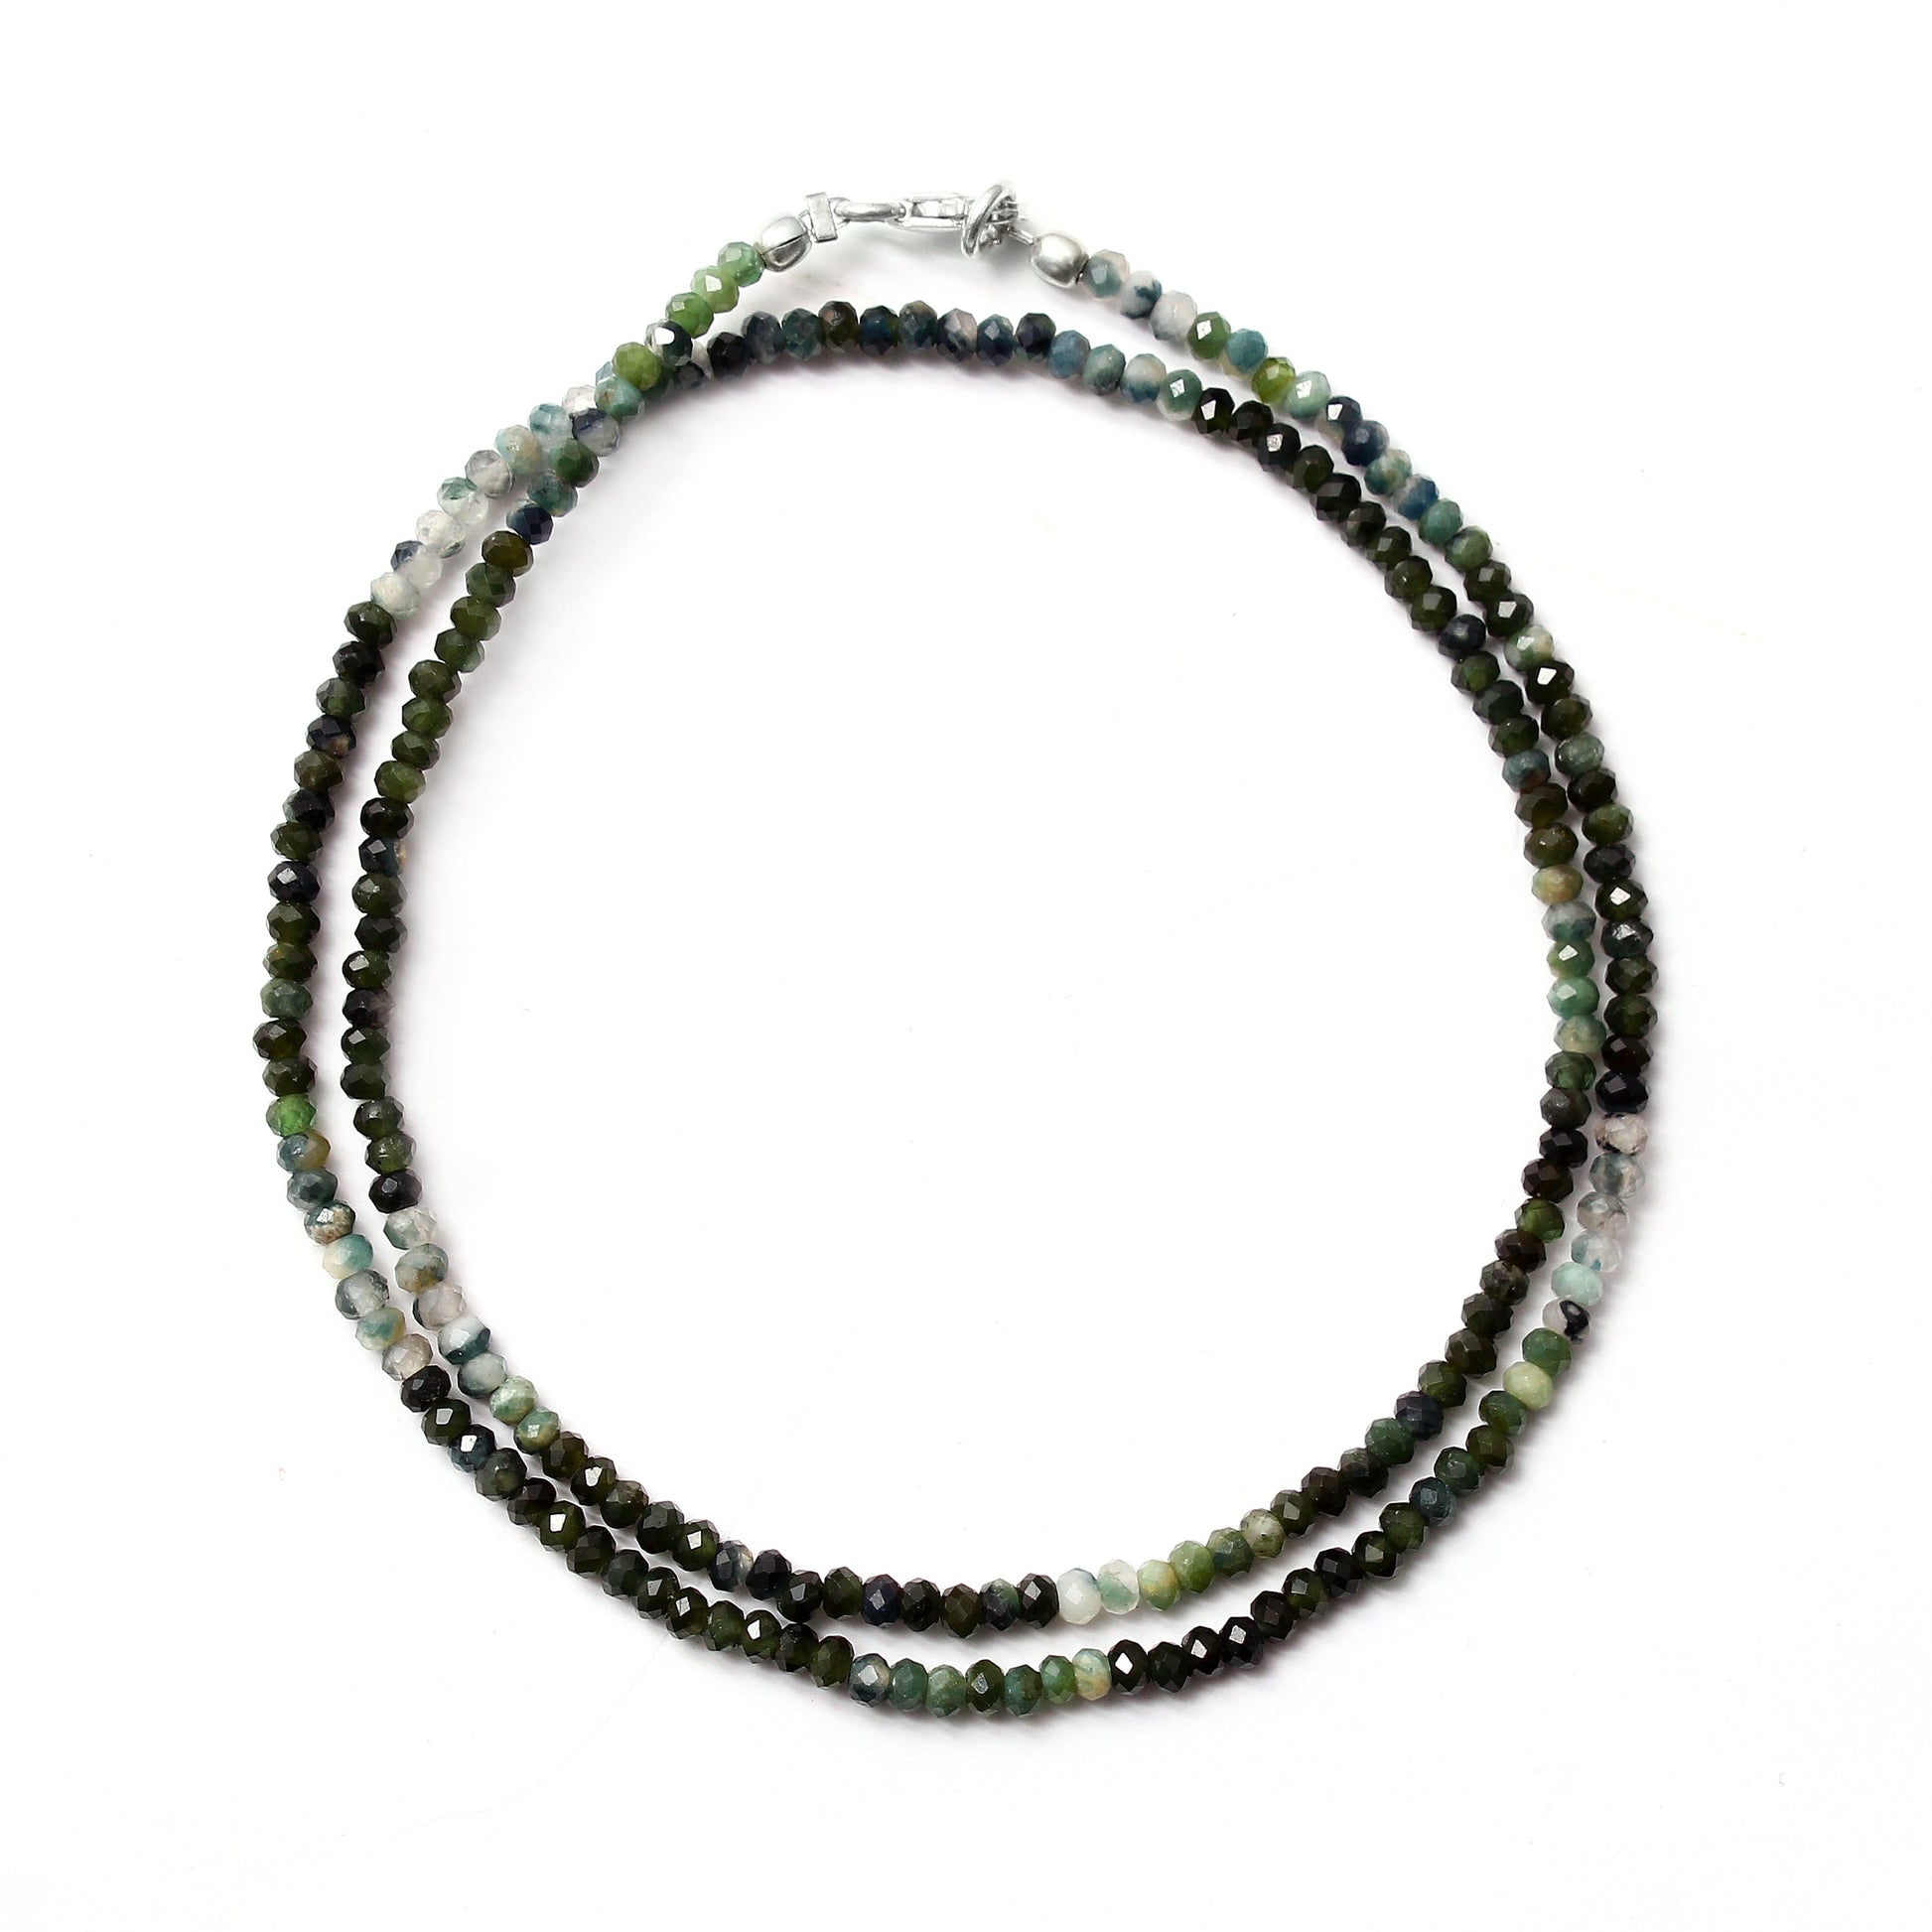 Natural Cat's Eye Beautiful Beaded Necklace, Micro Faceted Round Silver Lock Beaded Necklace. GemsRush